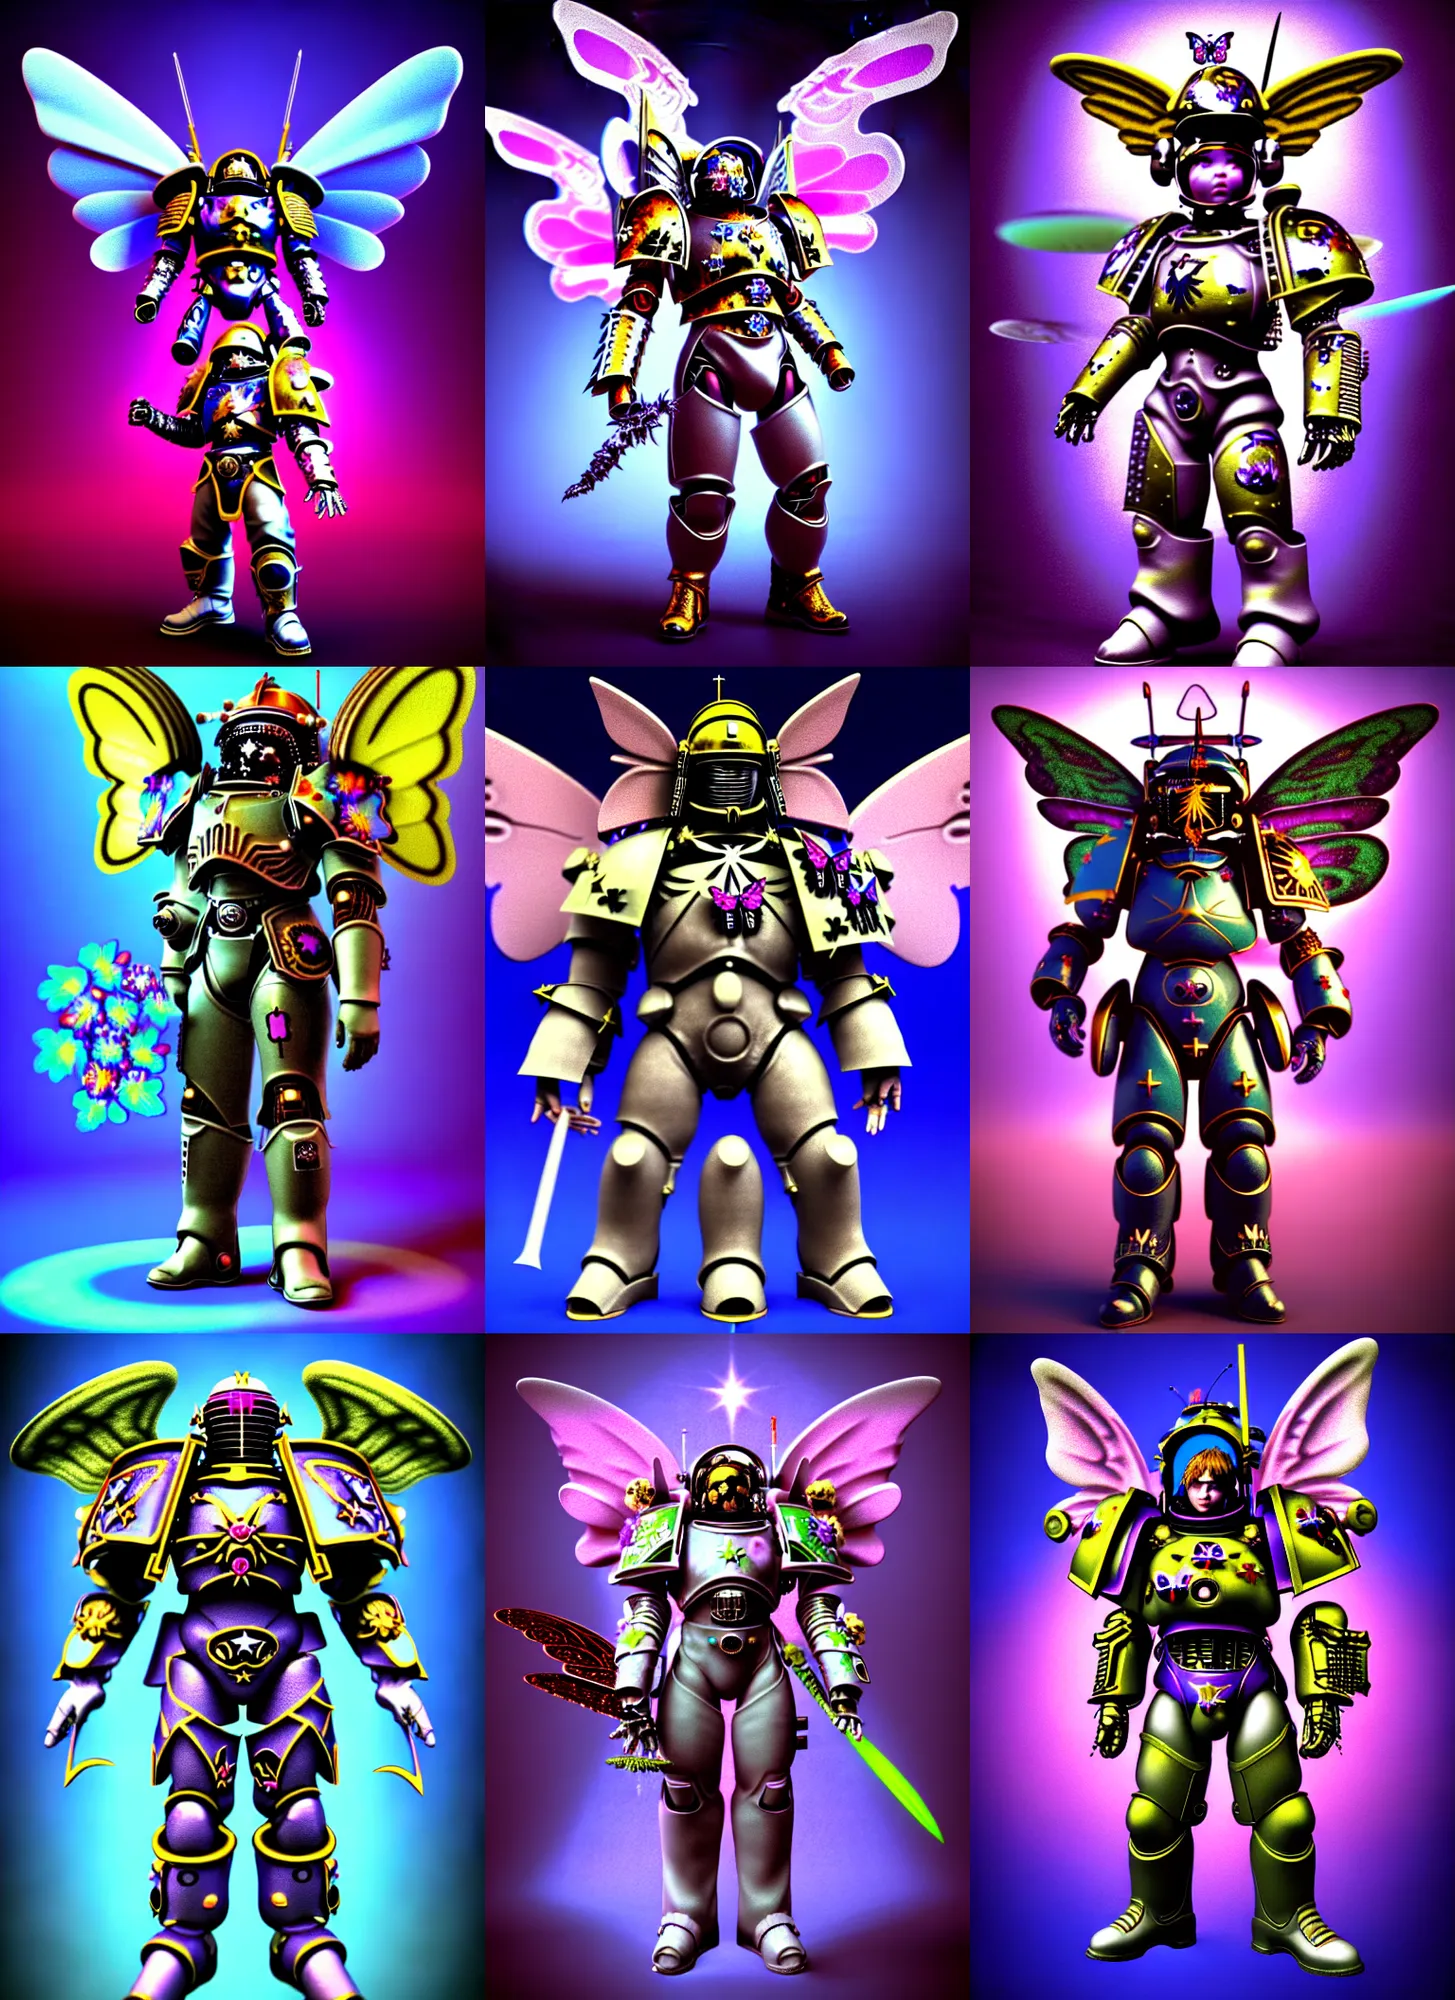 Prompt: 3 d render of chibi space marine warrior knight cyborg fairy by ichiro tanida wearing a big cowboy hat and wearing angel wings against a psychedelic surreal background with 3 d butterflies and 3 d flowers n the style of 1 9 9 0's cg graphics 3 d rendered y 2 k aesthetic by ichiro tanida, 3 do magazine